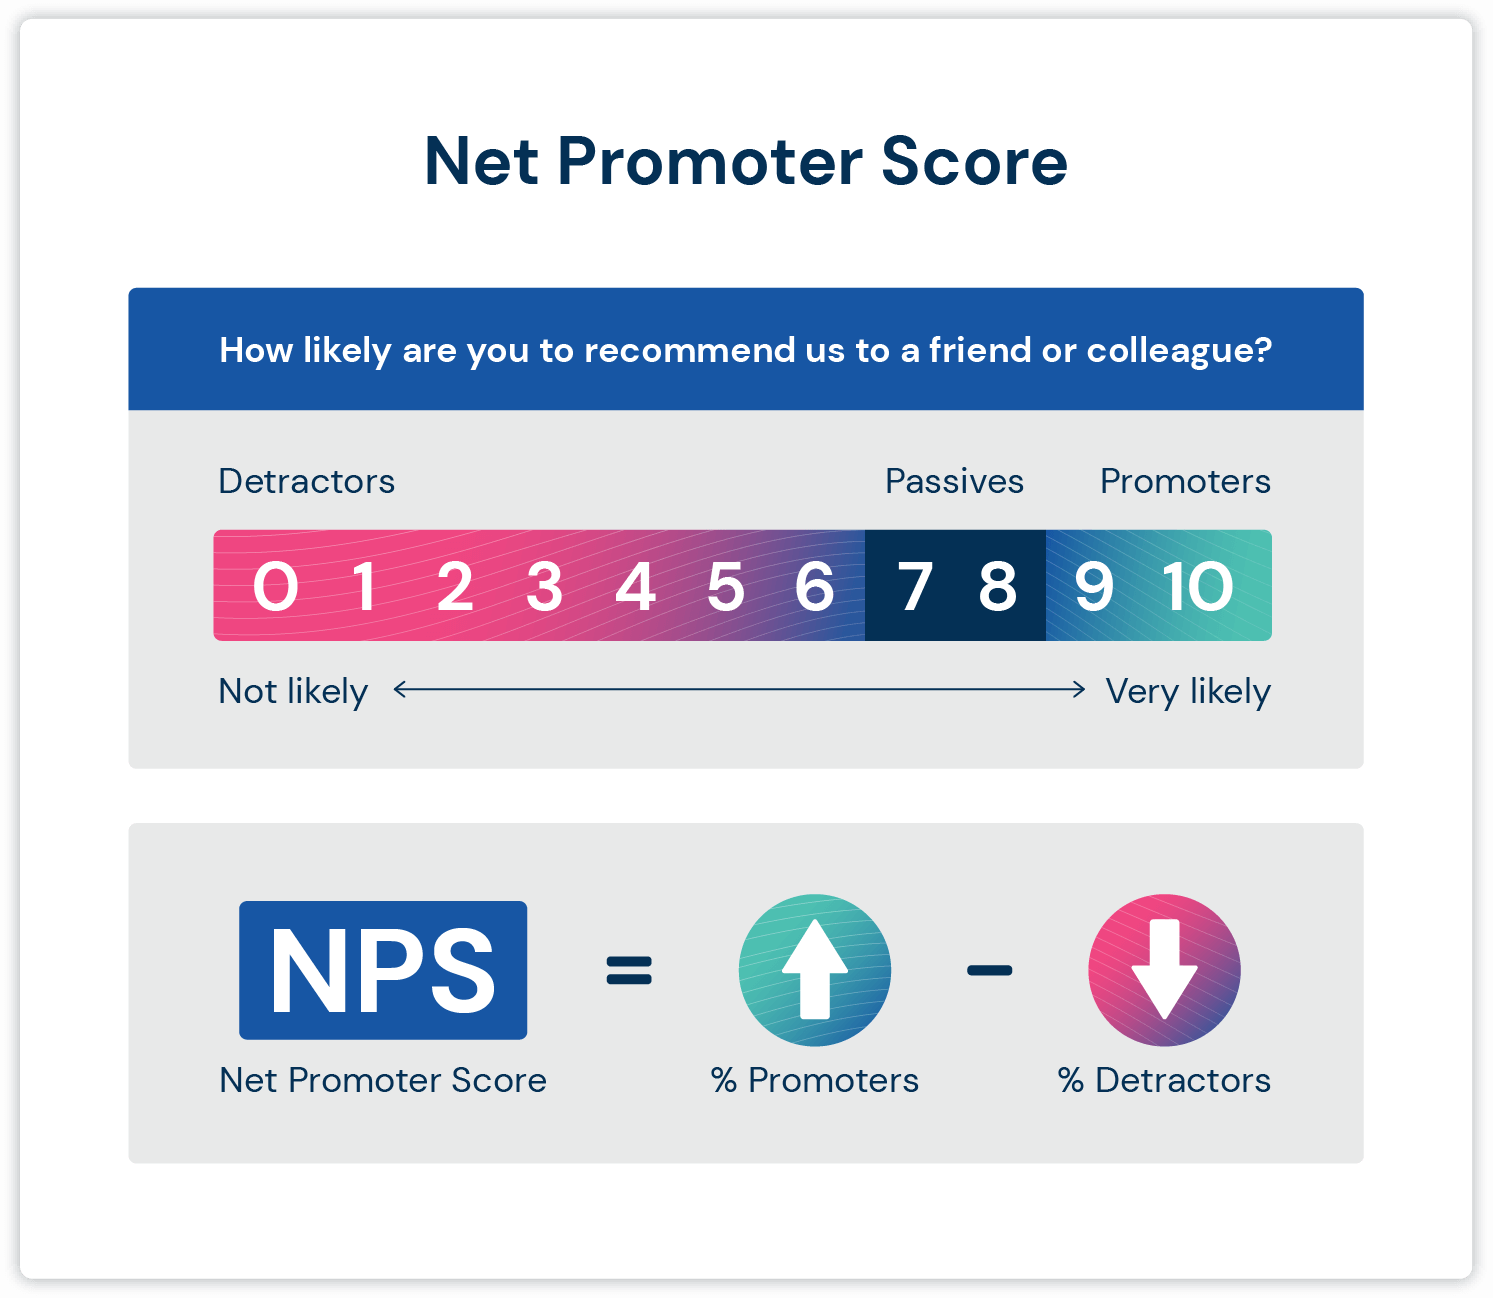 Graphic showing the net promoter score example. Rating from 0–6 are detractors, 7–8 are passives, while 9–10 are promoters. The net promoter score is the percentage of promoters subtracted by the number of detractors. 